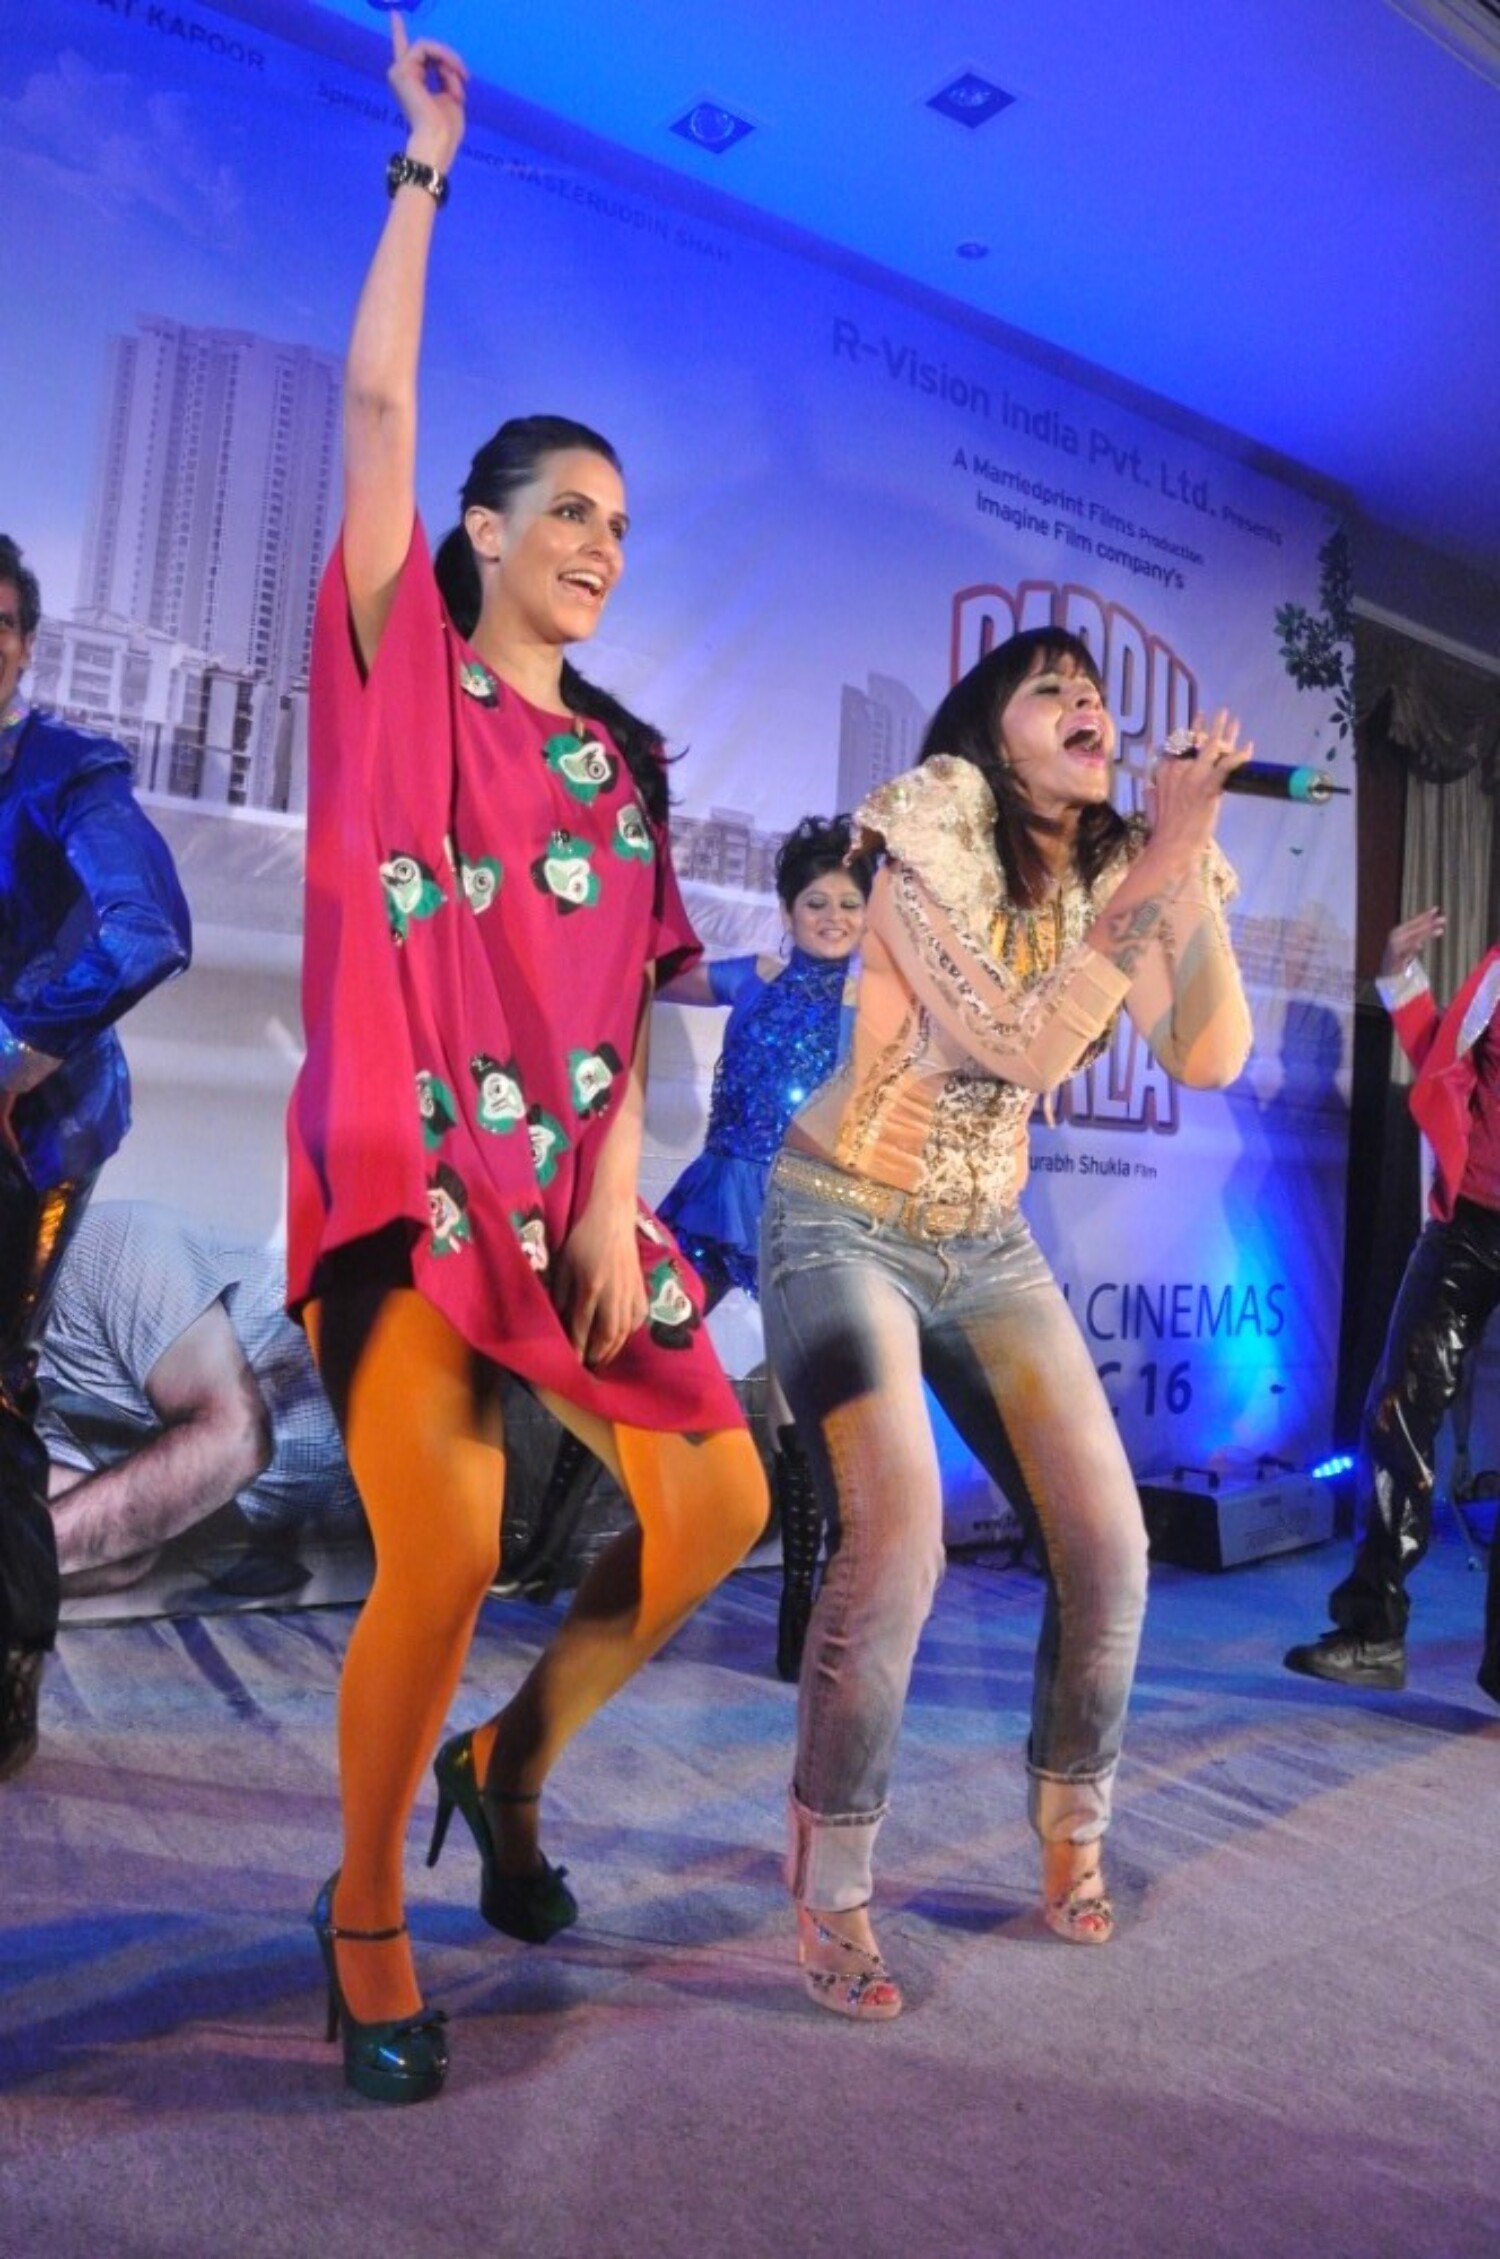 Neha Dhupia Dancing With Manasi Scott Singing At Film Pappu Can T Dance Saala Music Launch 1 Rediff Bollywood Photos On Rediff Pages Neha dhupia on wn network delivers the latest videos and editable pages for news & events, including entertainment, music, sports, science and more, sign up and share your playlists. rediff pages rediffmail